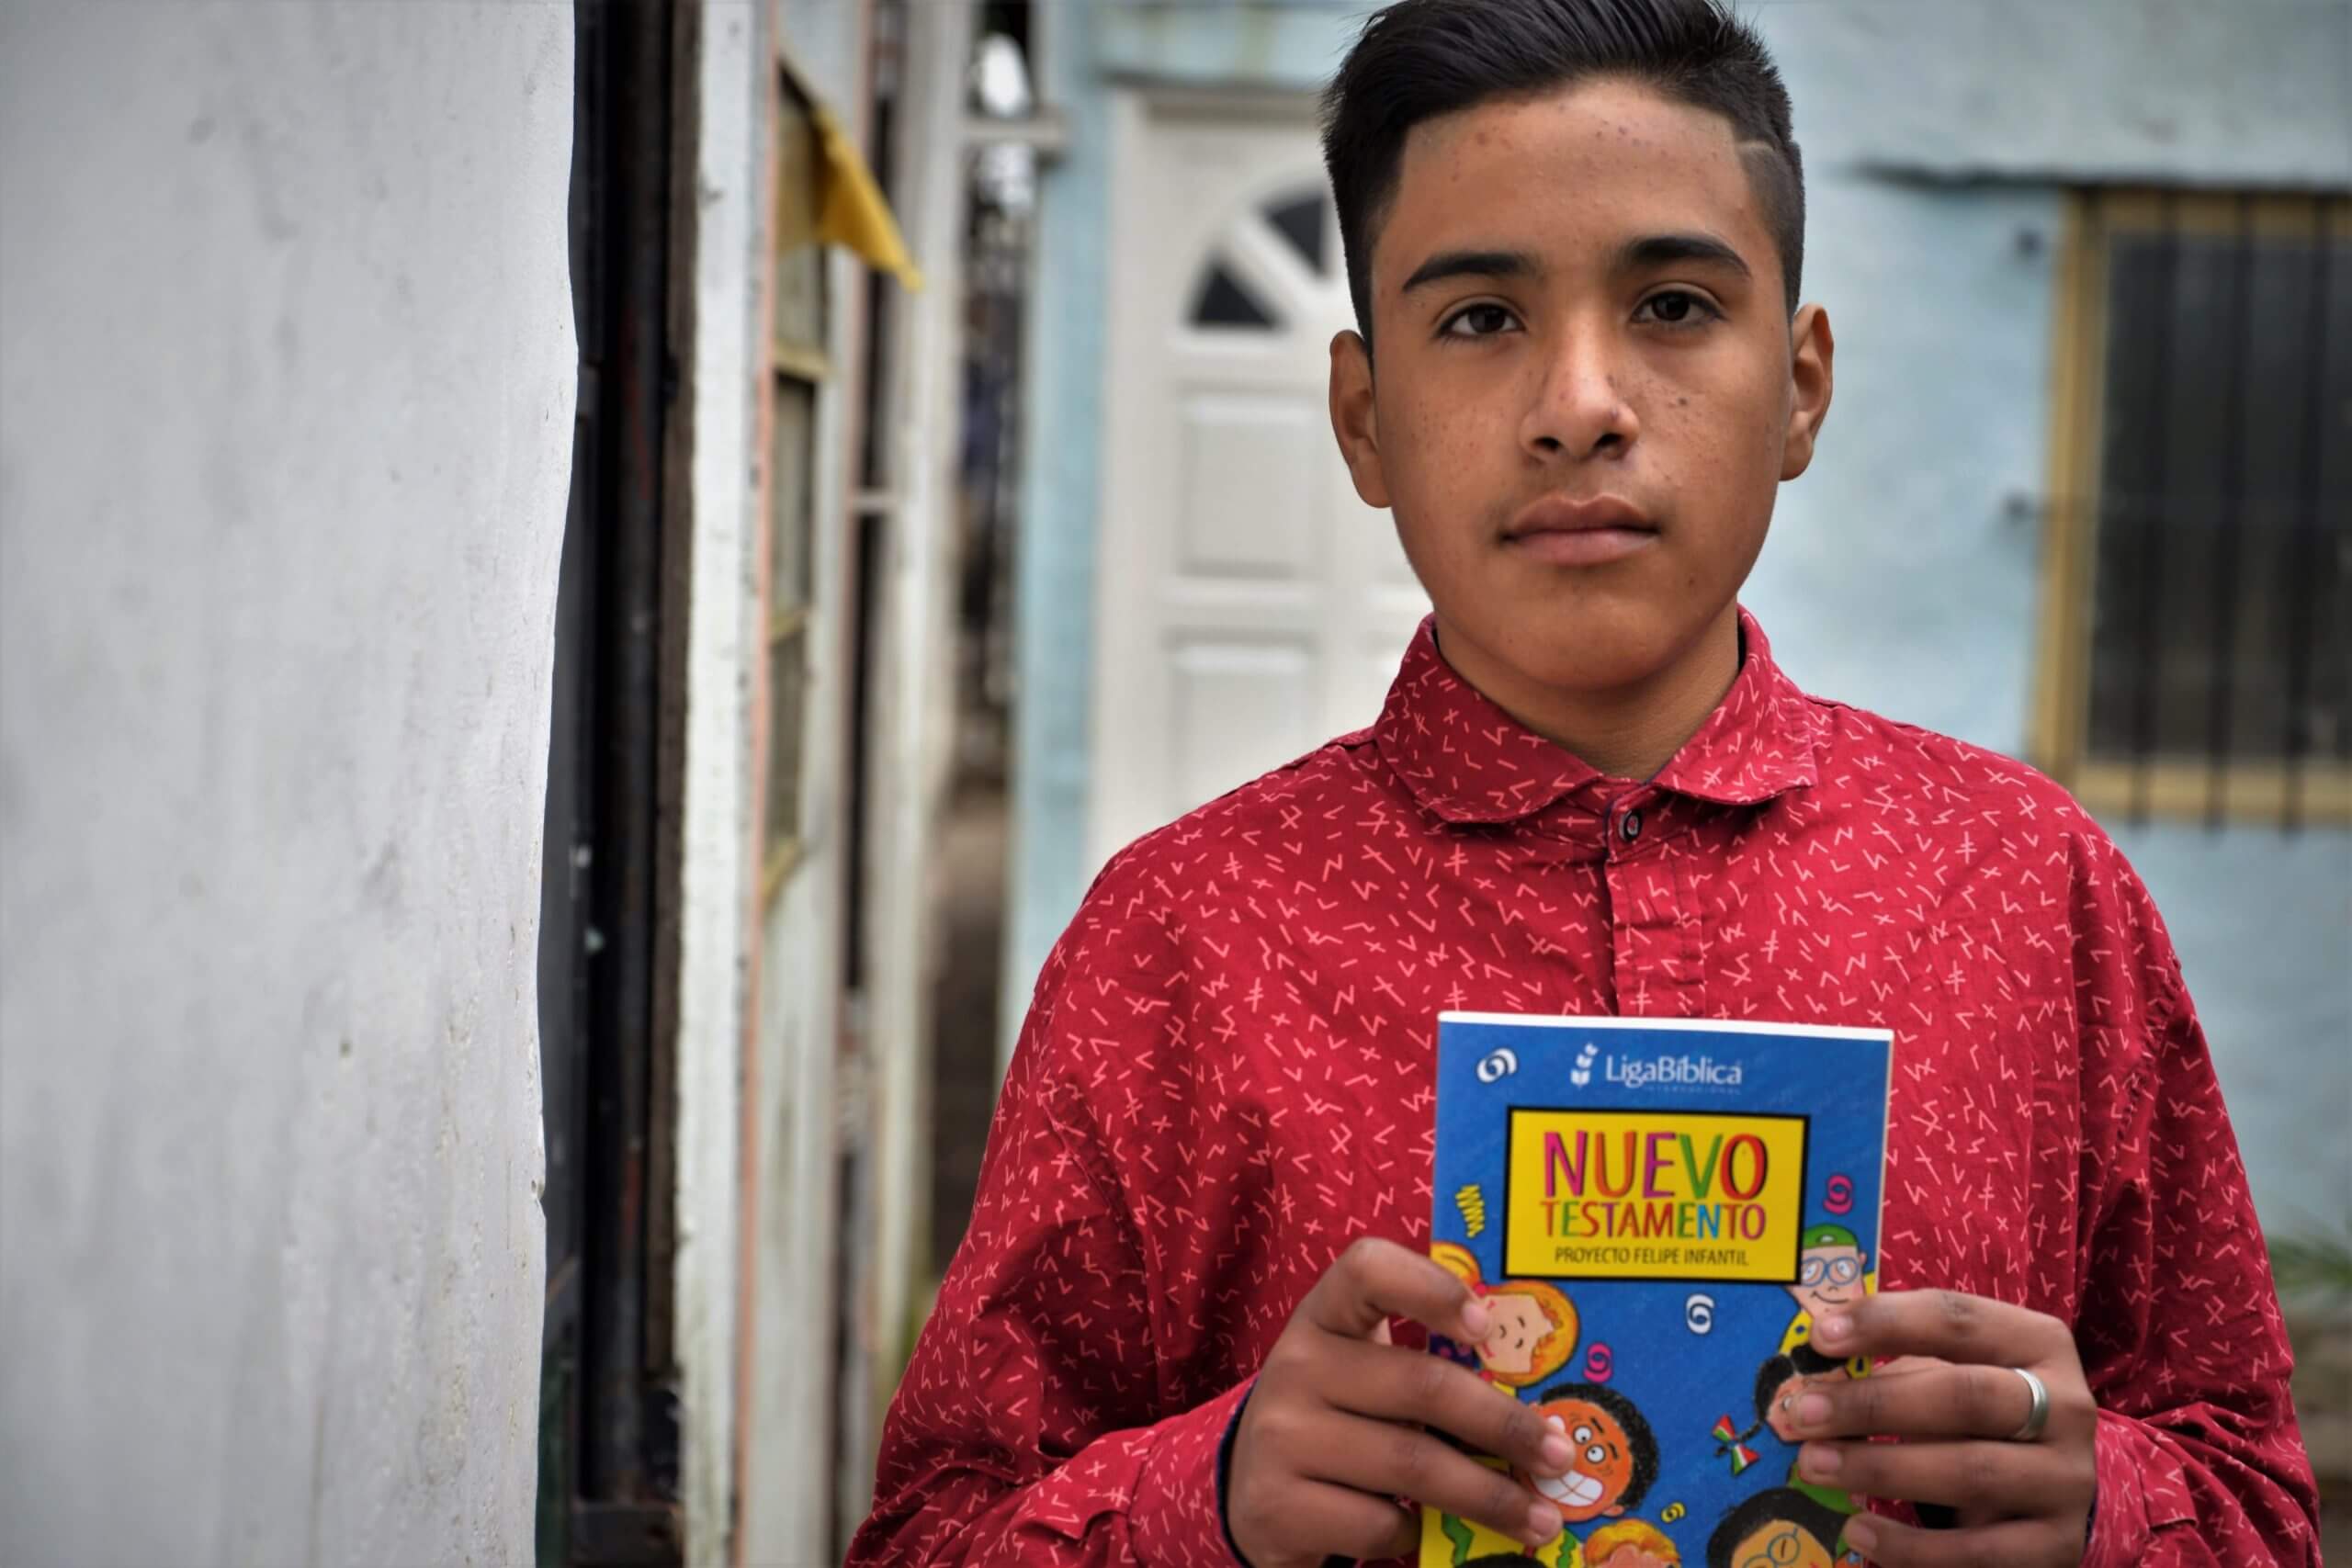 Isaias holding a book